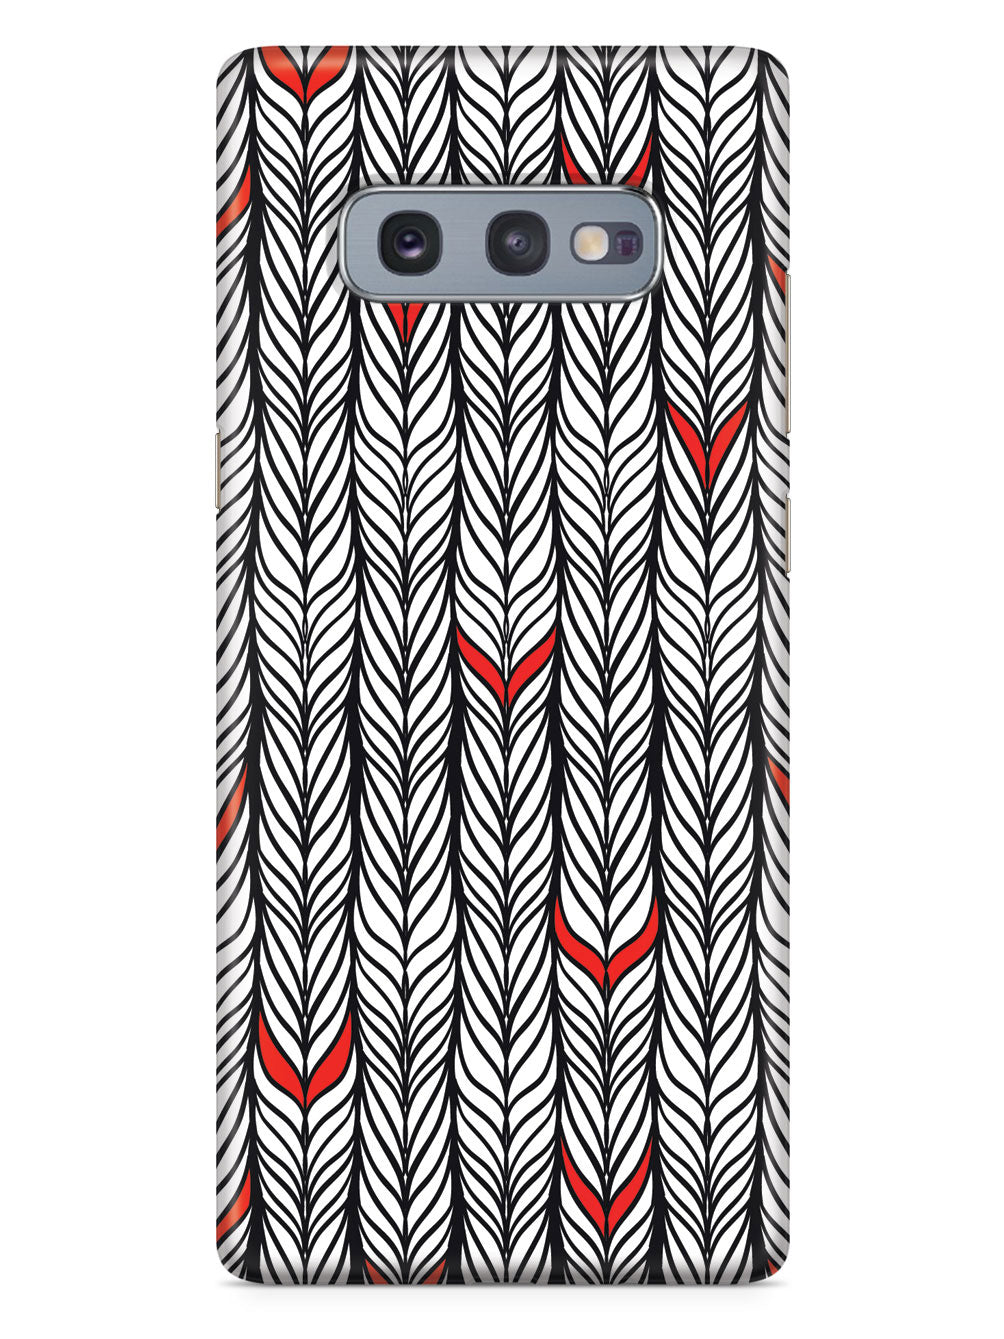 Braids Texture with Red Accents Case